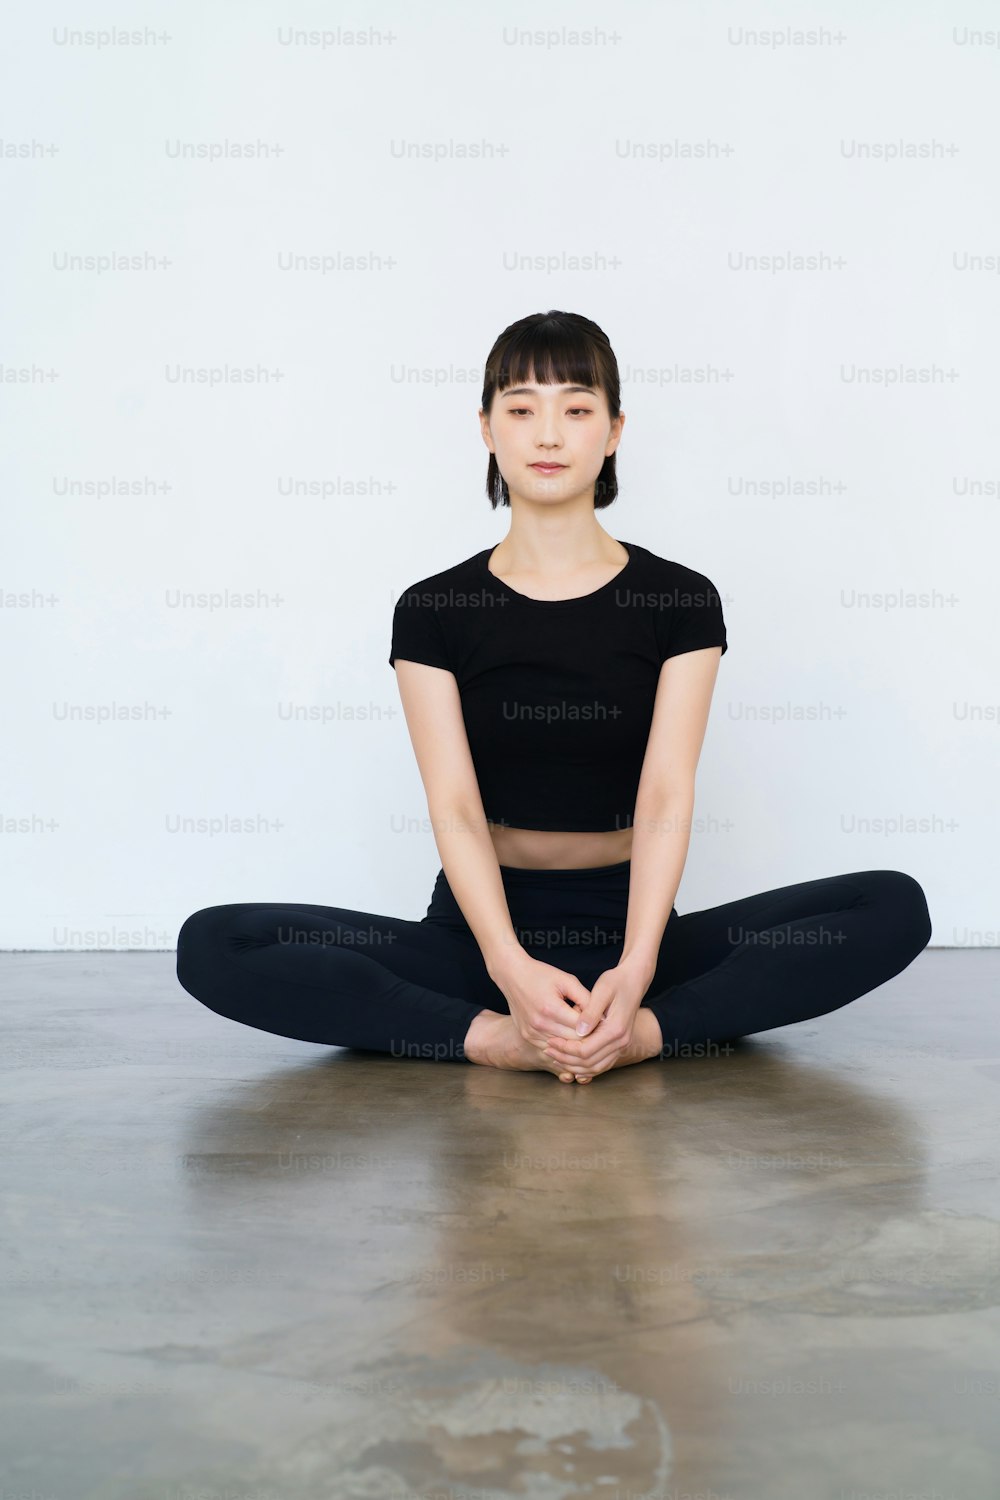 A woman doing yoga in a sole pose indoors